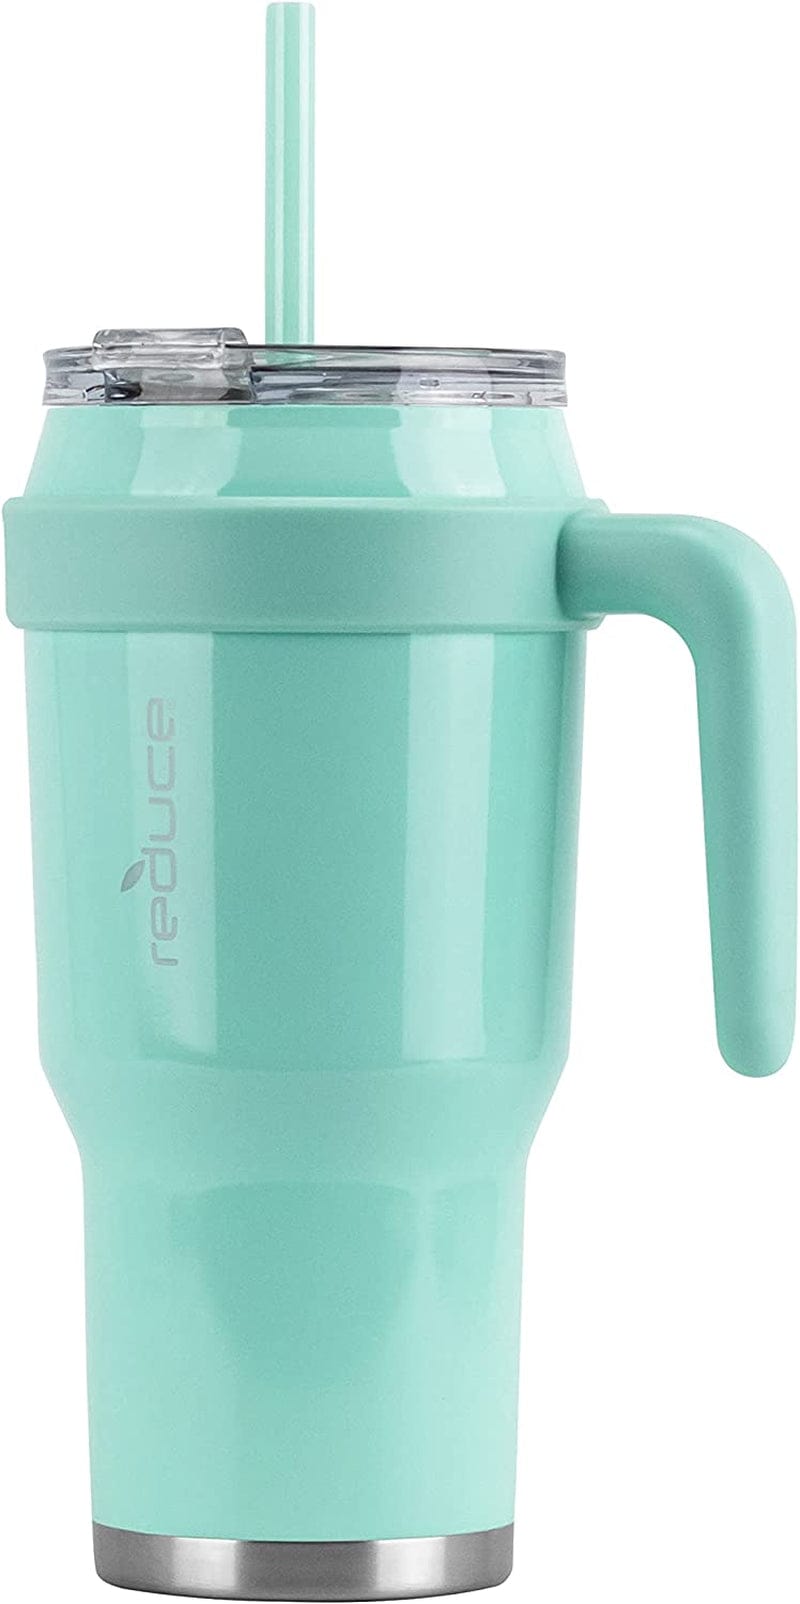 Reduce 40 Oz Tumbler with Handle and Straw, Stainless Steel with Sip-It-Your-Way Lid - Keeps Drinks Cold up to 34 Hours - Sweat Proof, Dishwasher Safe, BPA Free - Mild Mint, Opaque Gloss Home & Garden > Kitchen & Dining > Tableware > Drinkware REDUCE   